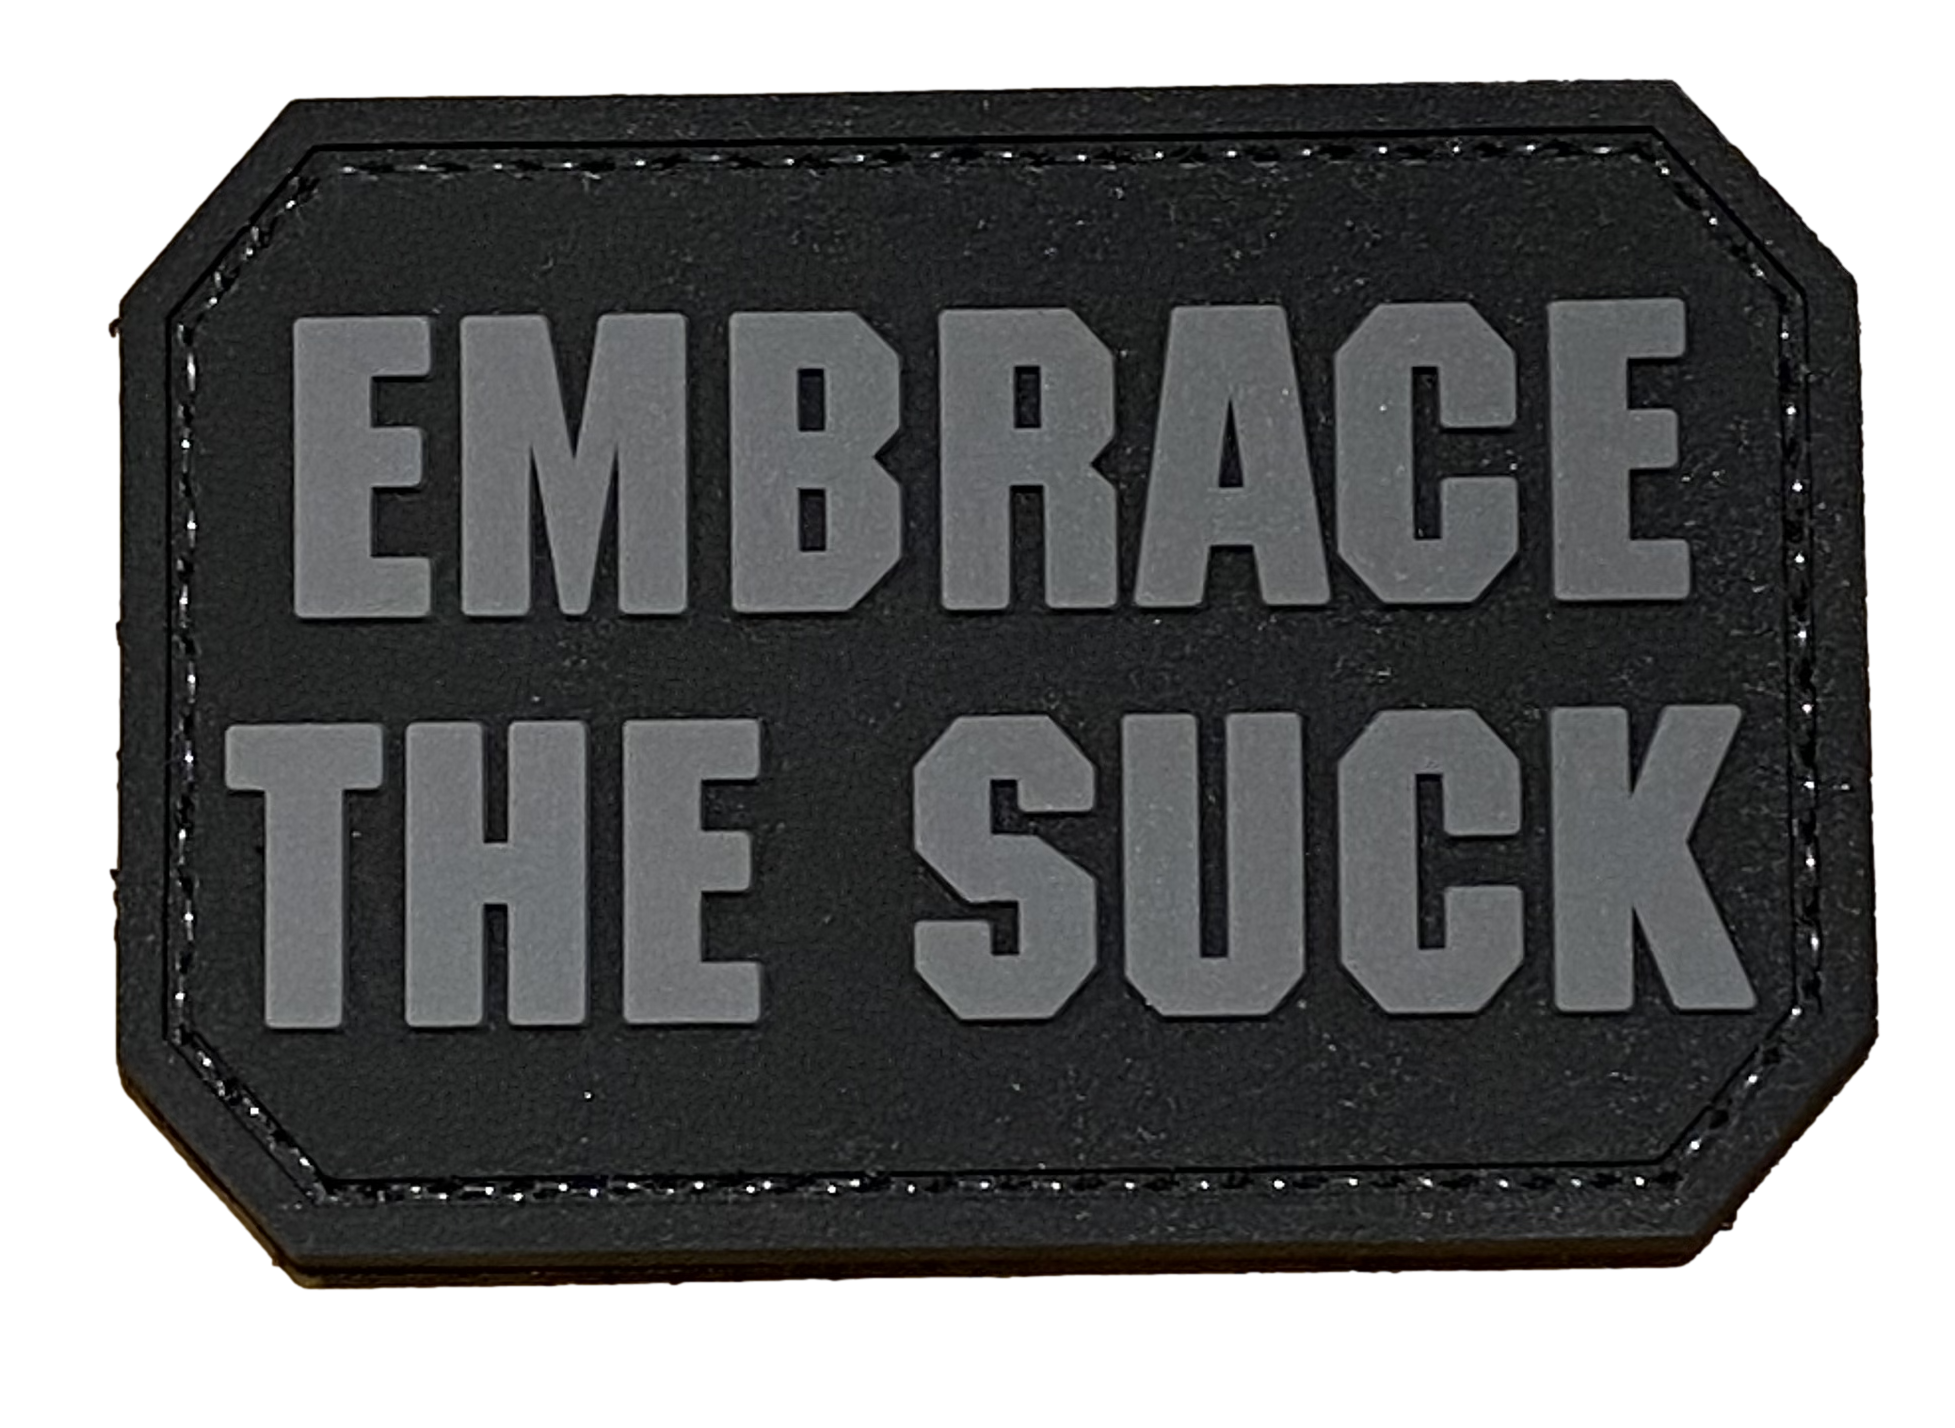 Embrace The Suck - Patch